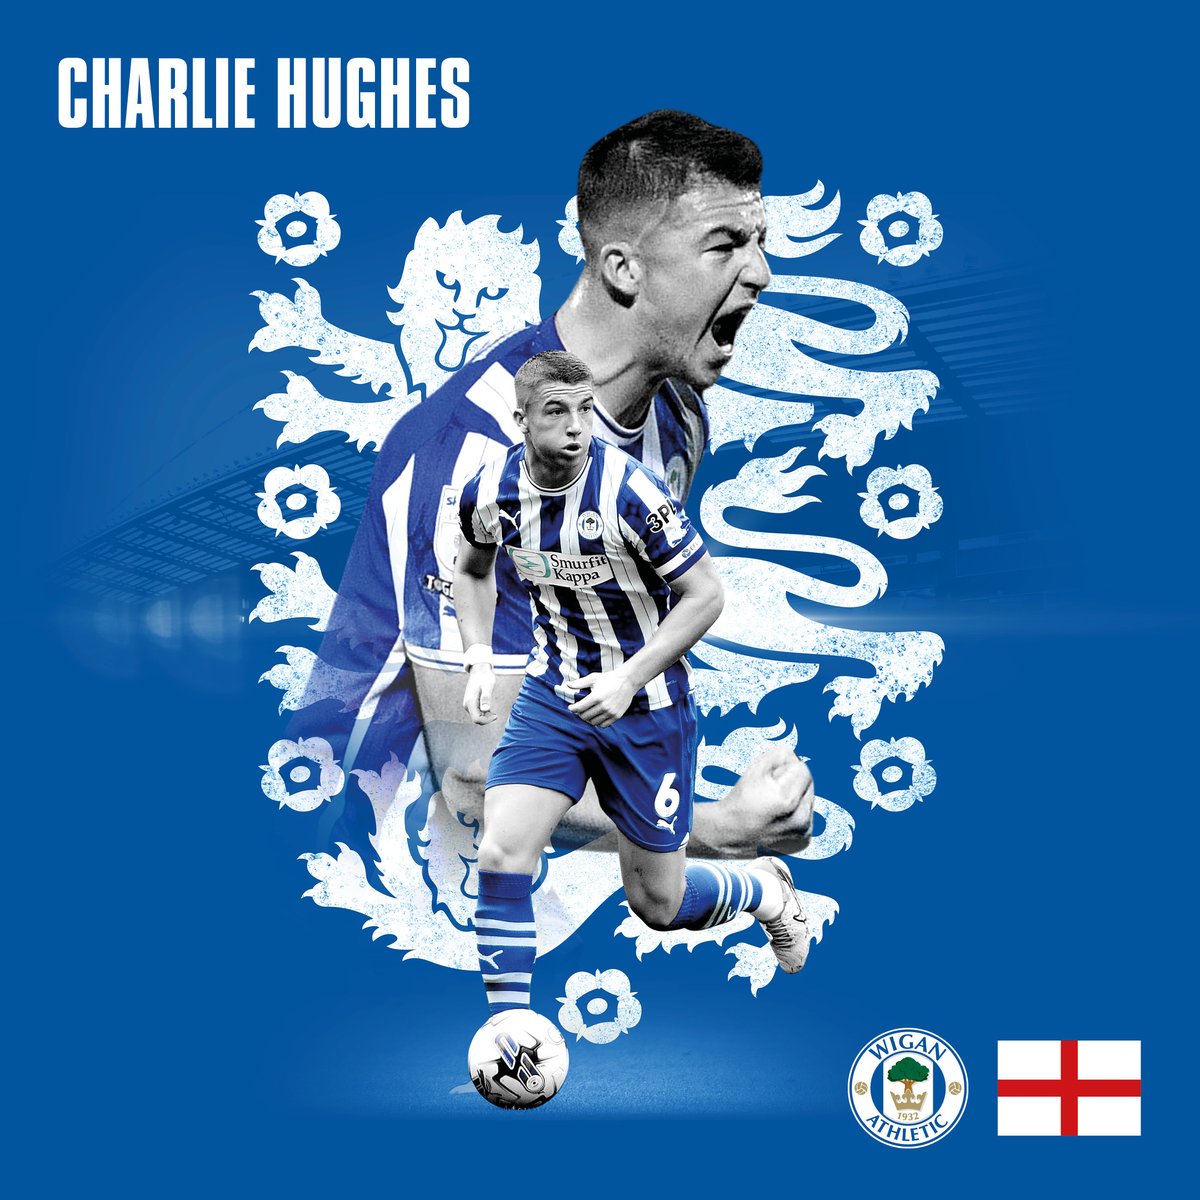 𝗢𝗻𝗲 𝗼𝗳 𝗢𝘂𝗿 𝗢𝘄𝗻. 💙 🦁 🏴󠁧󠁢󠁥󠁮󠁧󠁿 Congratulations to Academy graduate, @CharlieHughes32, who has earned his first international call-up for England’s Euro Elite Squad! 👏 #wafc 🔵⚪️